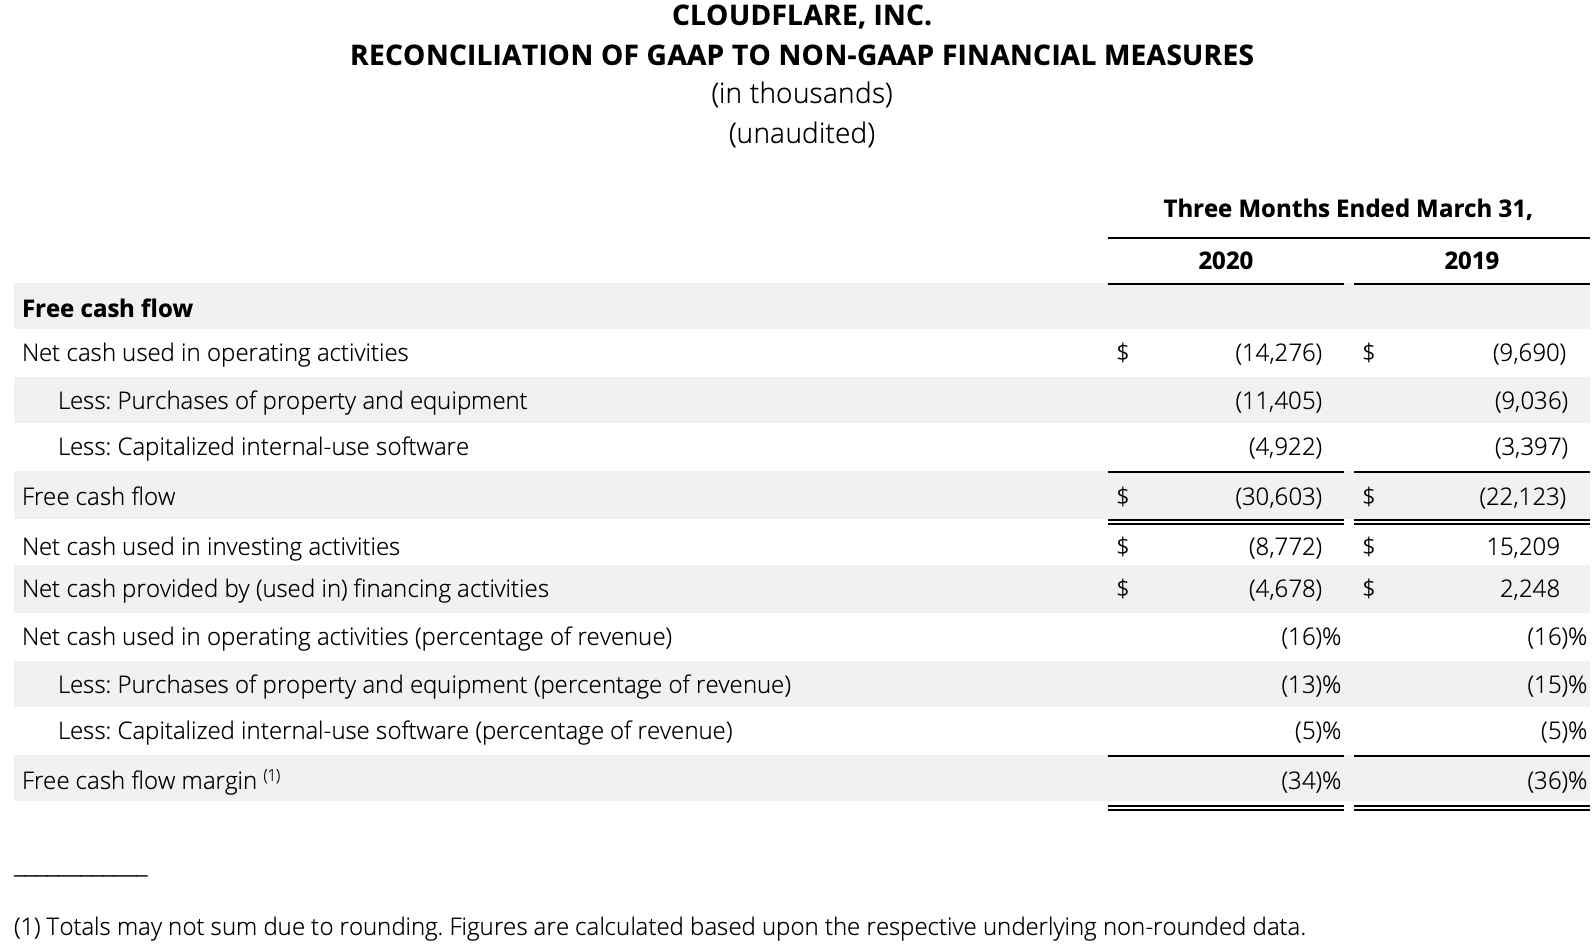 Reconciliation of GAAP 2 